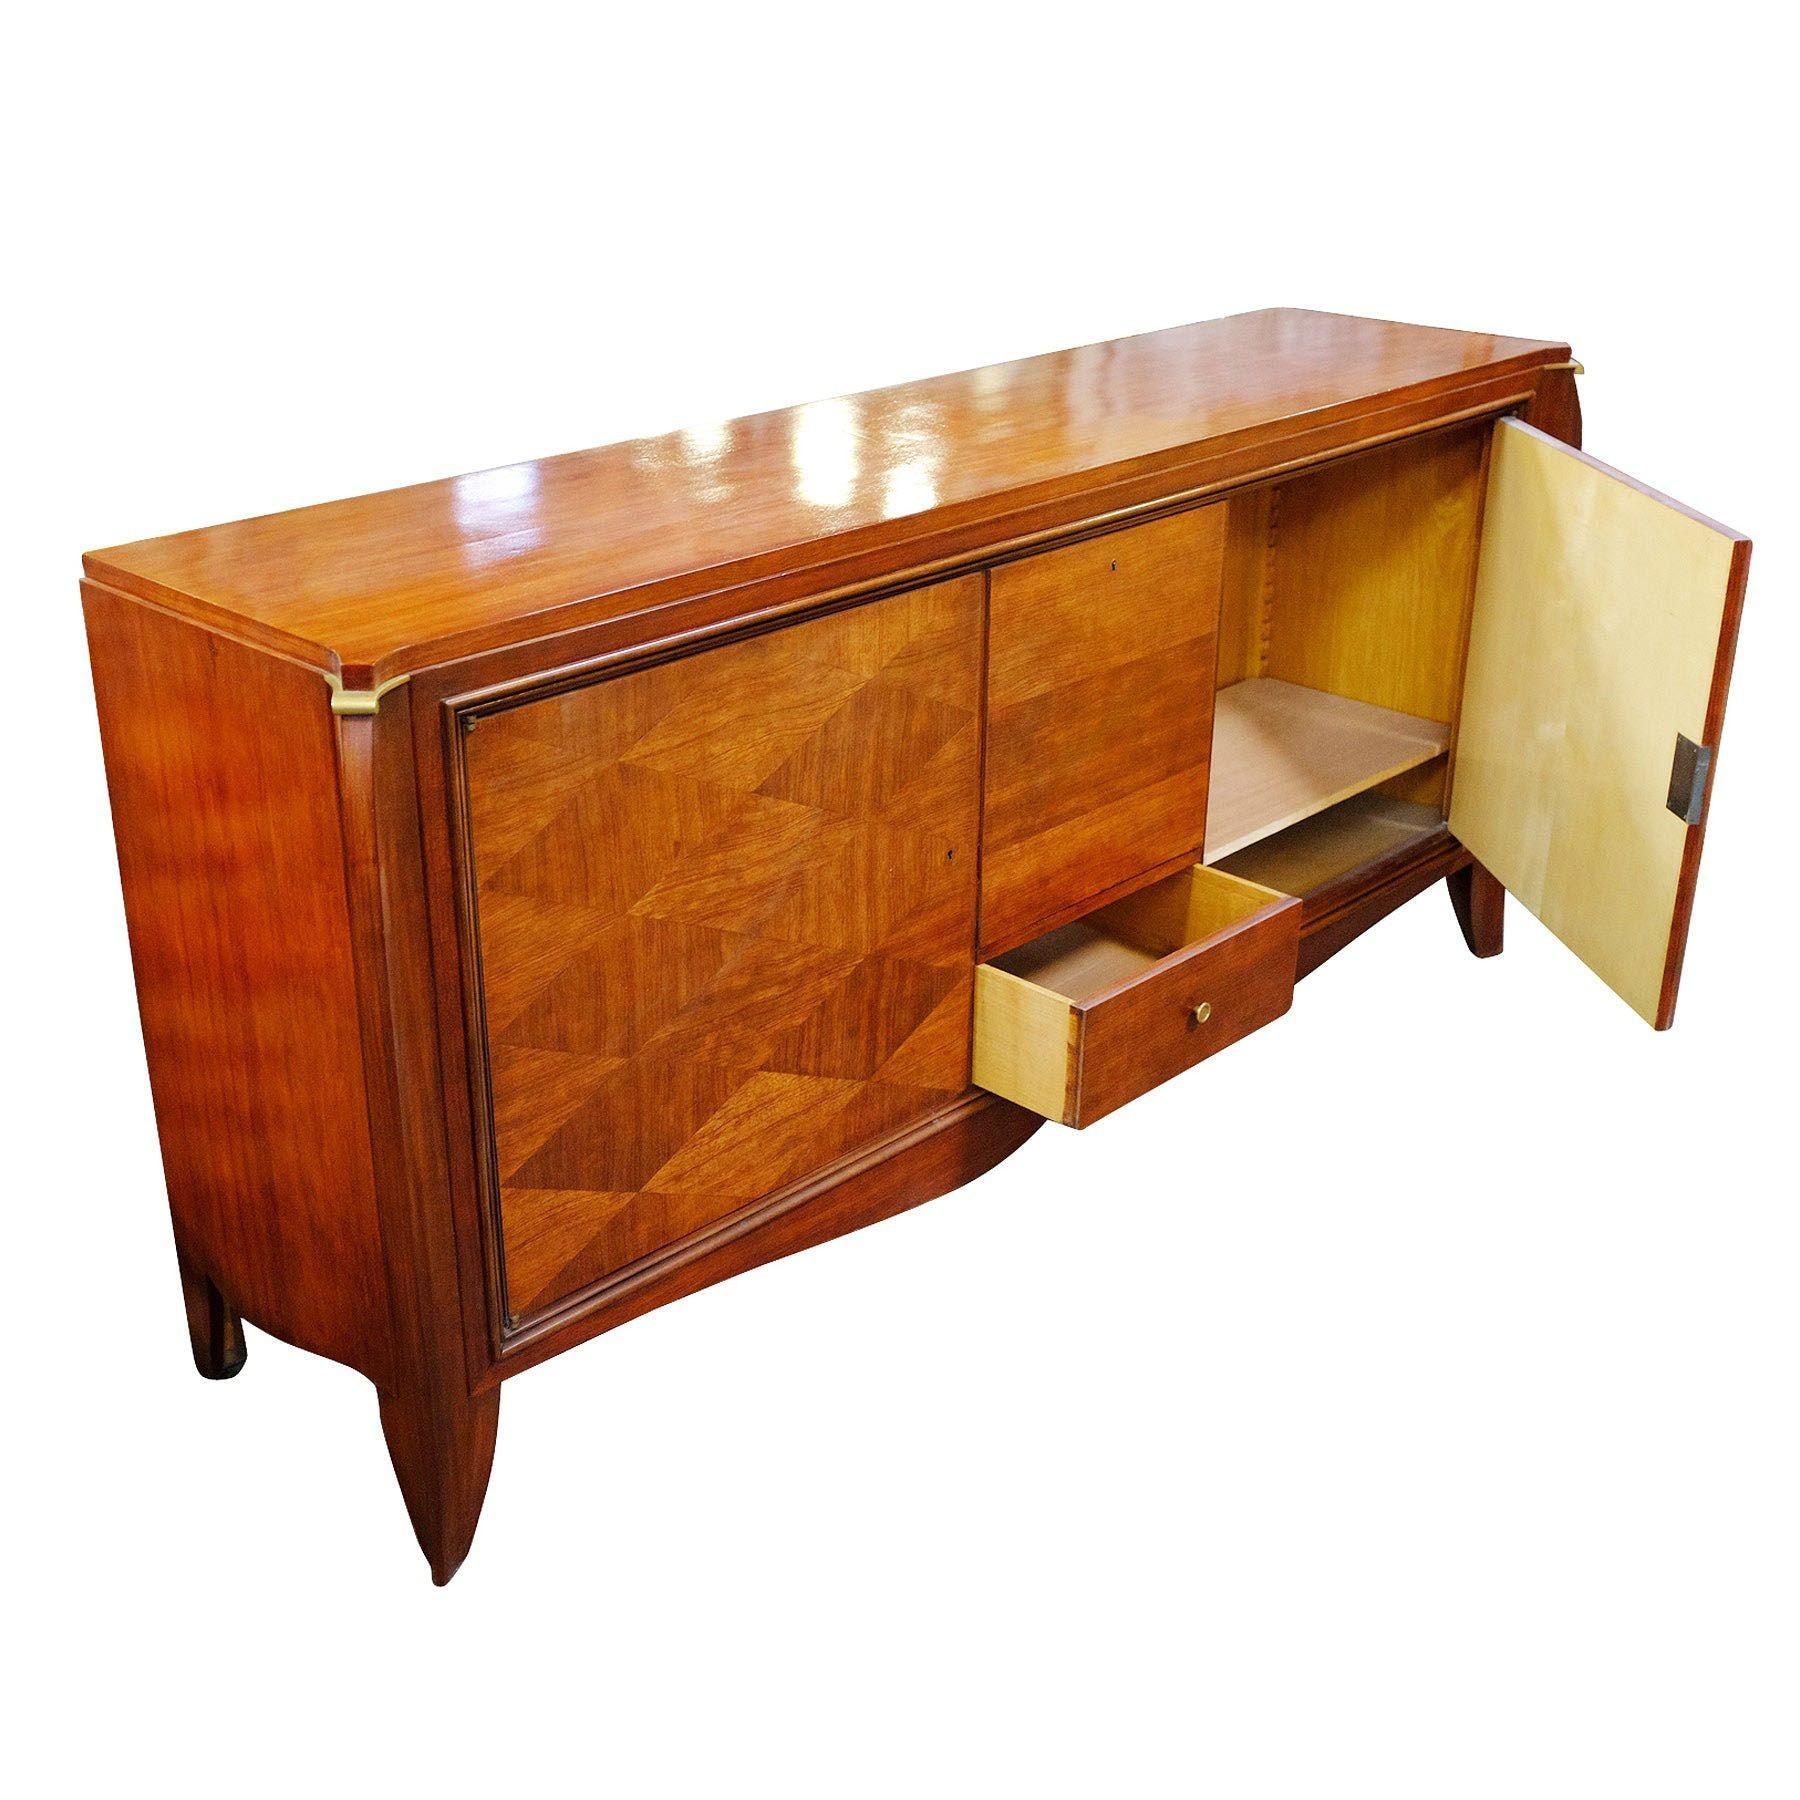 Mid-20th Century Elegant French Art Deco Sideboard For Sale